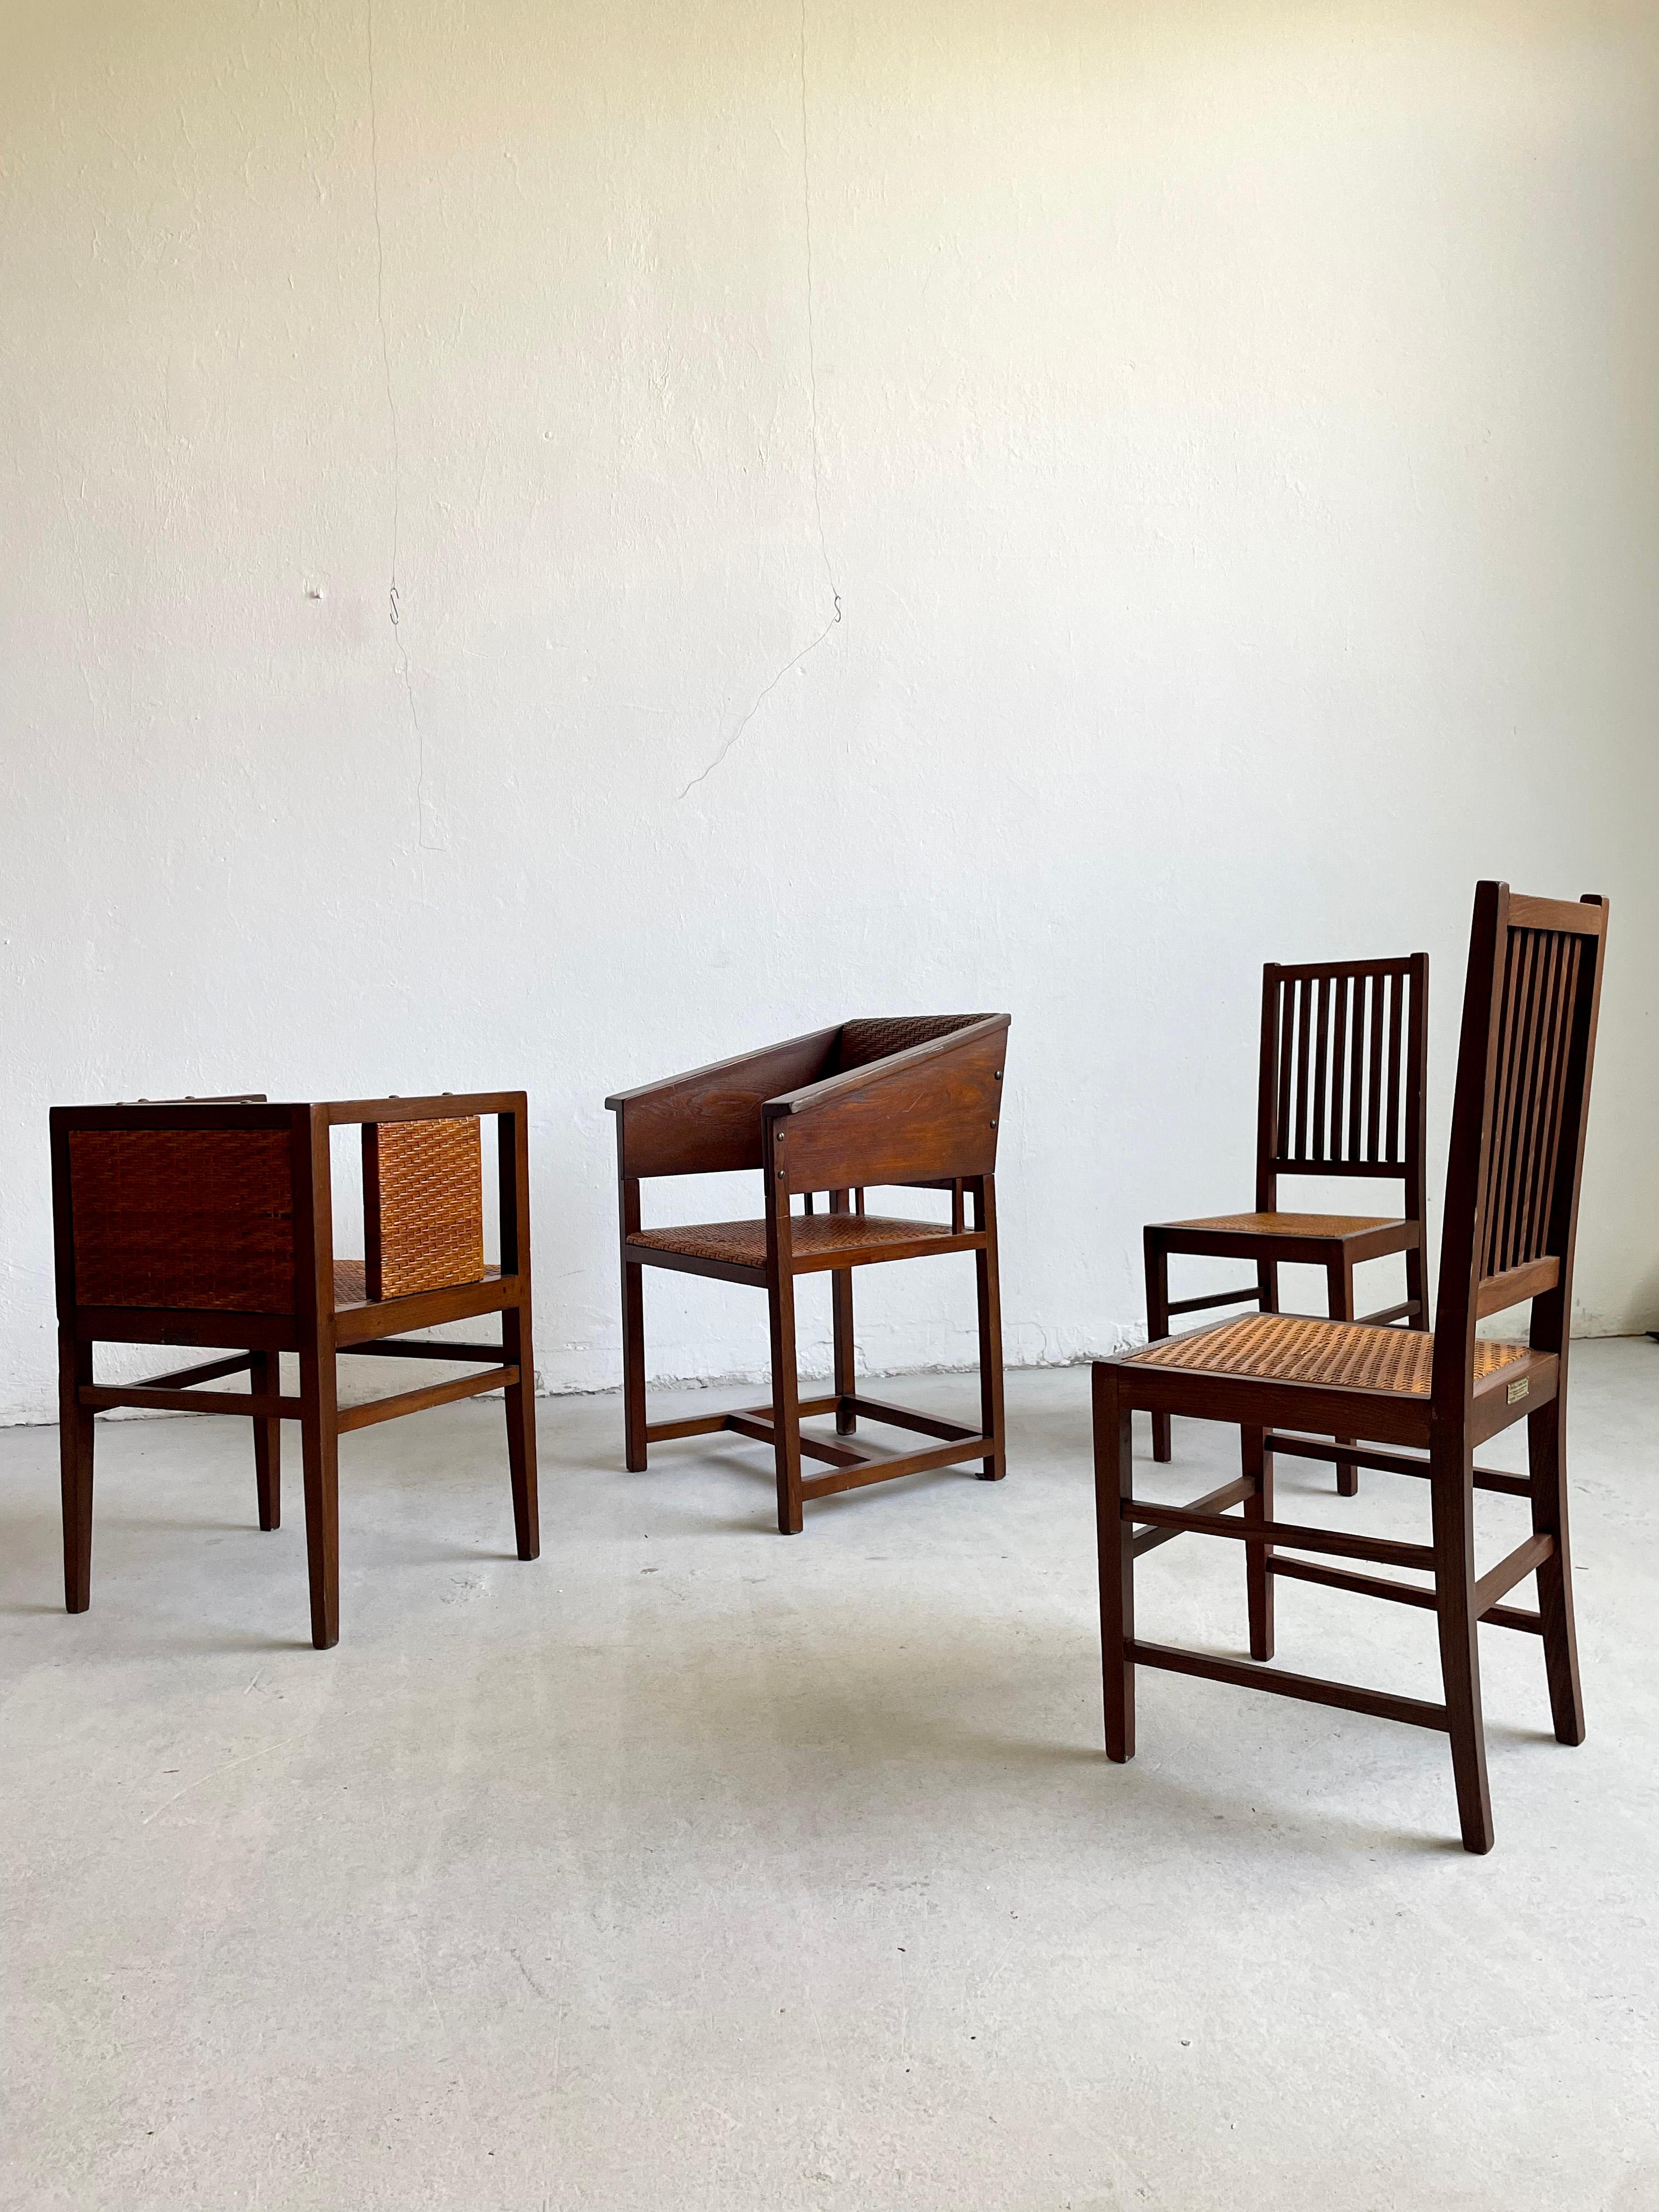 This set of 4 chairs manufactured by Prag-Rudniker Korbfabrikation in 1902 represents a nice, museum quality collection of important design of the Vienna Secession. 

The collection includes tinted Oak and Cane Chair Mod. 464 and a pair of